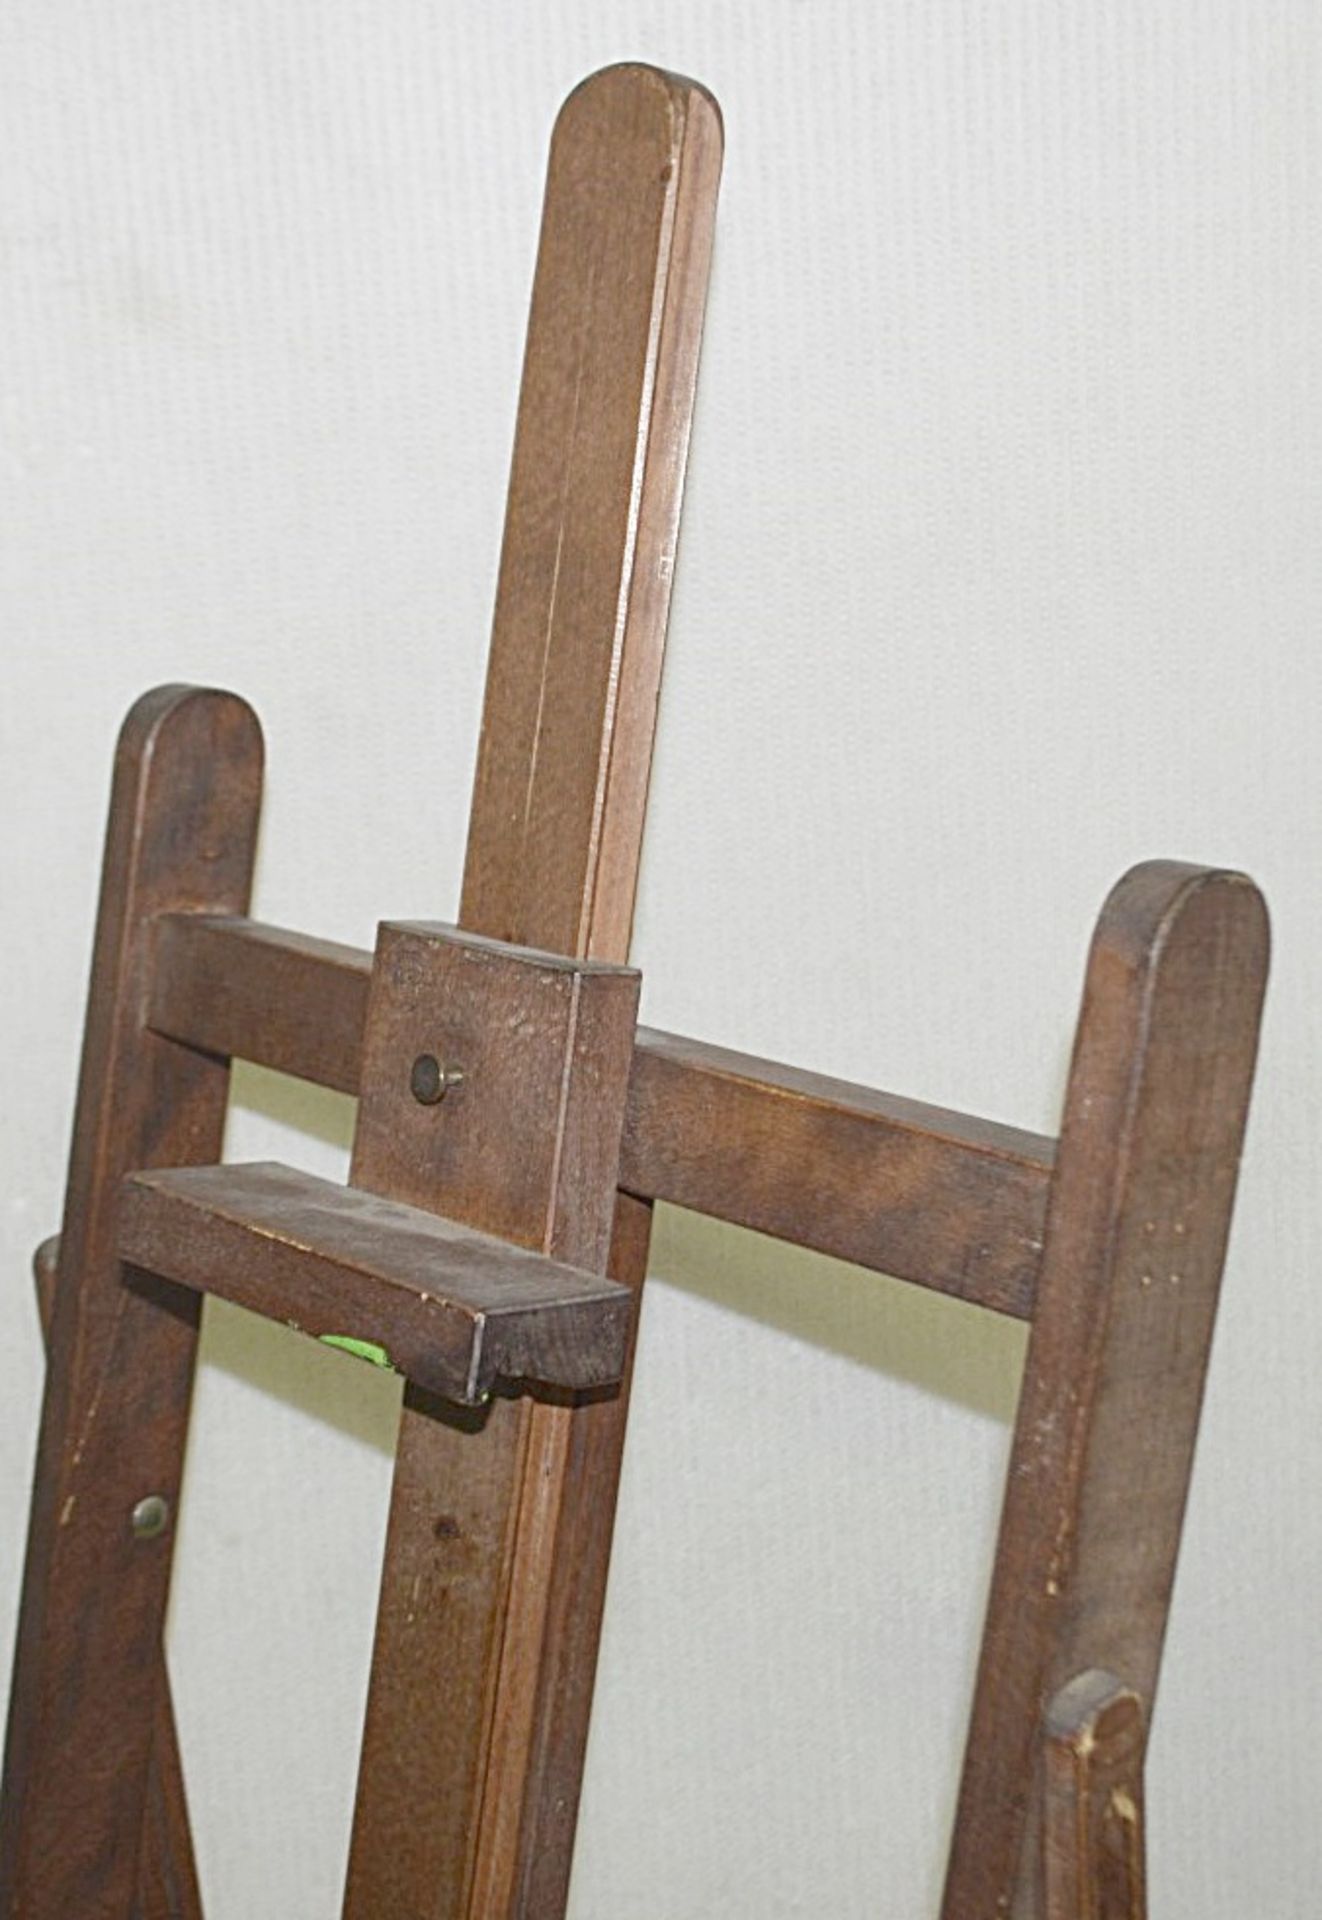 1 x Vintage Wooden Easel Display Prop - Dimensions (as pictured): H147 x W58 x D50cm - Ex-Showroom - Image 4 of 6